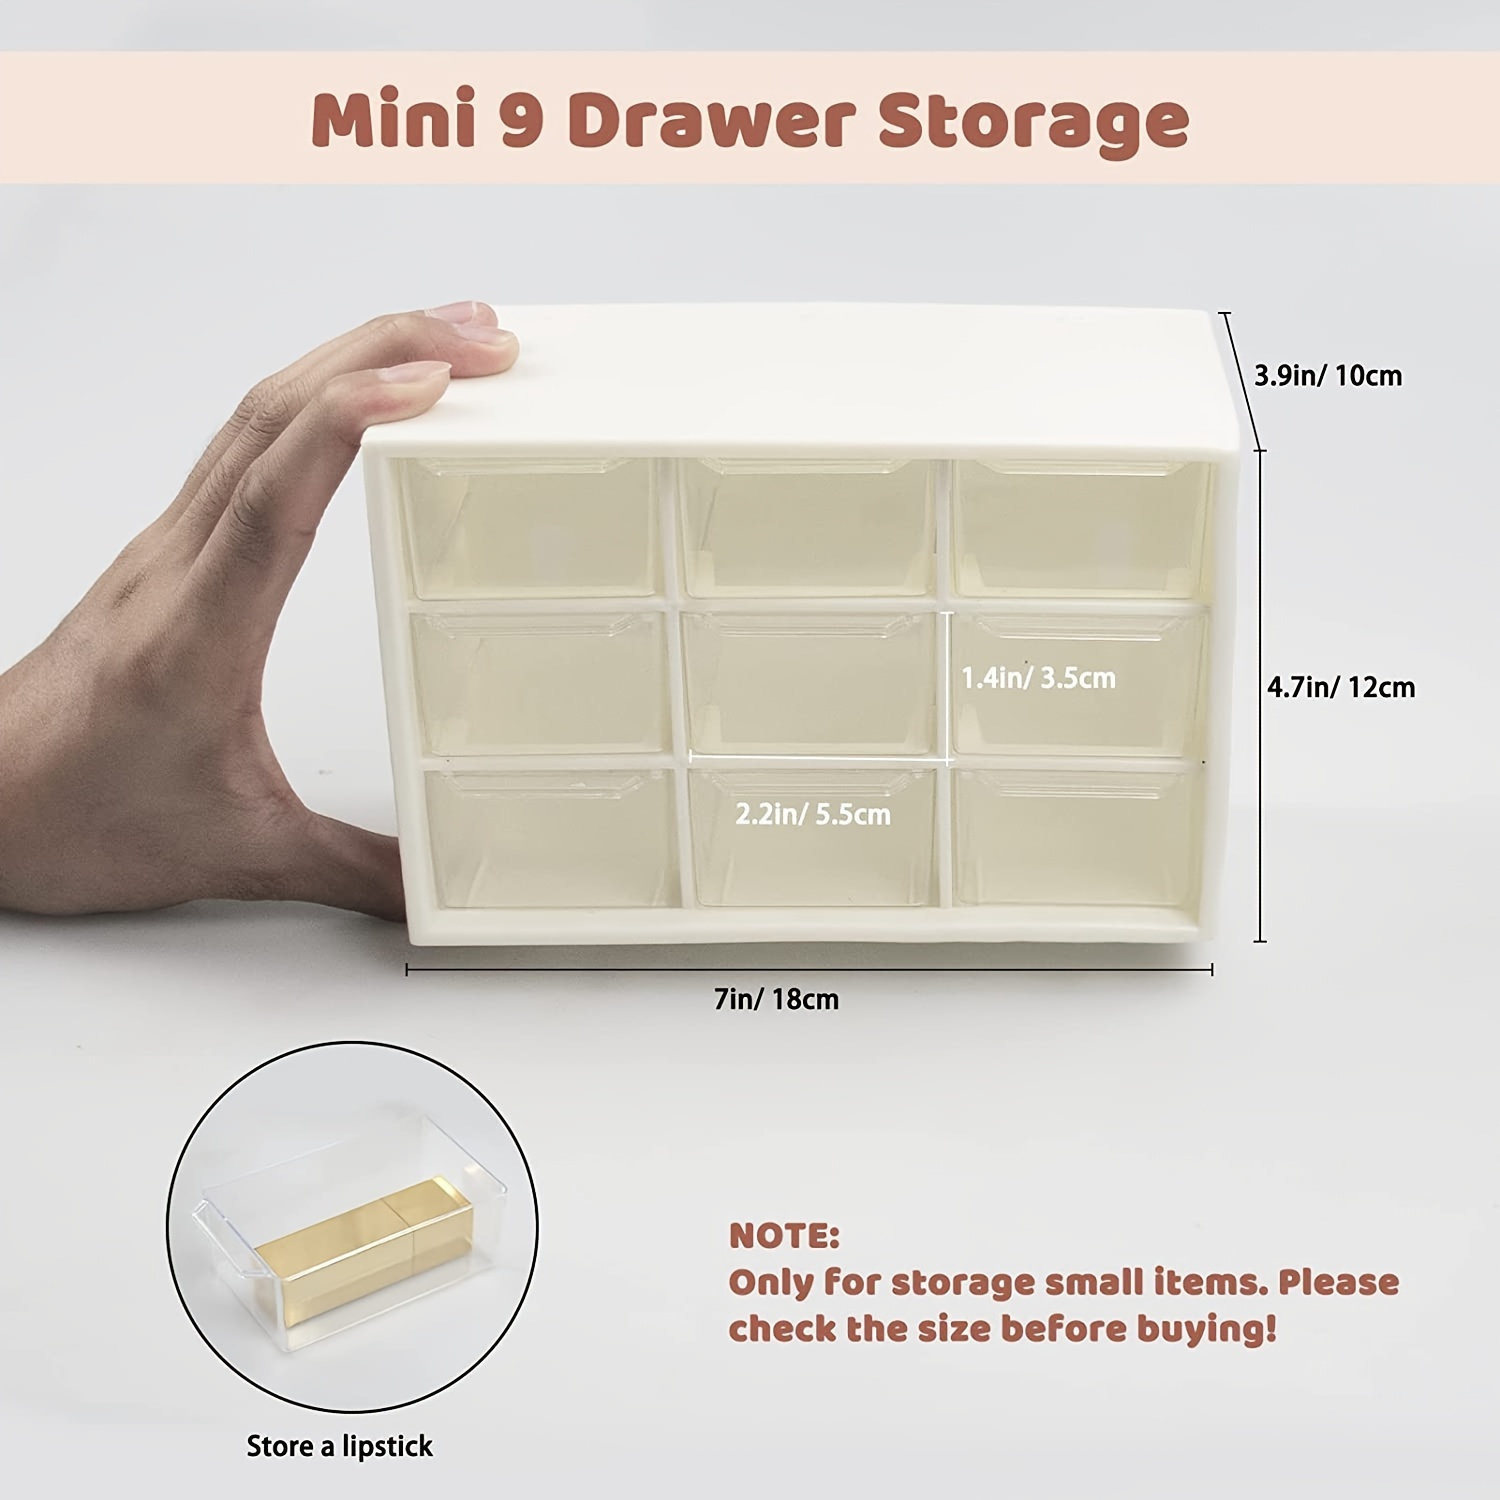  6 Pcs Mini Drawer Organizer Small Organizer with Drawers  Plastic Desktop Storage Box with 9 Drawers Desk Craft Organizer for Office  Home Room Jewelry Cosmetics Collection, Wall Mounted (Yellow) : Office  Products